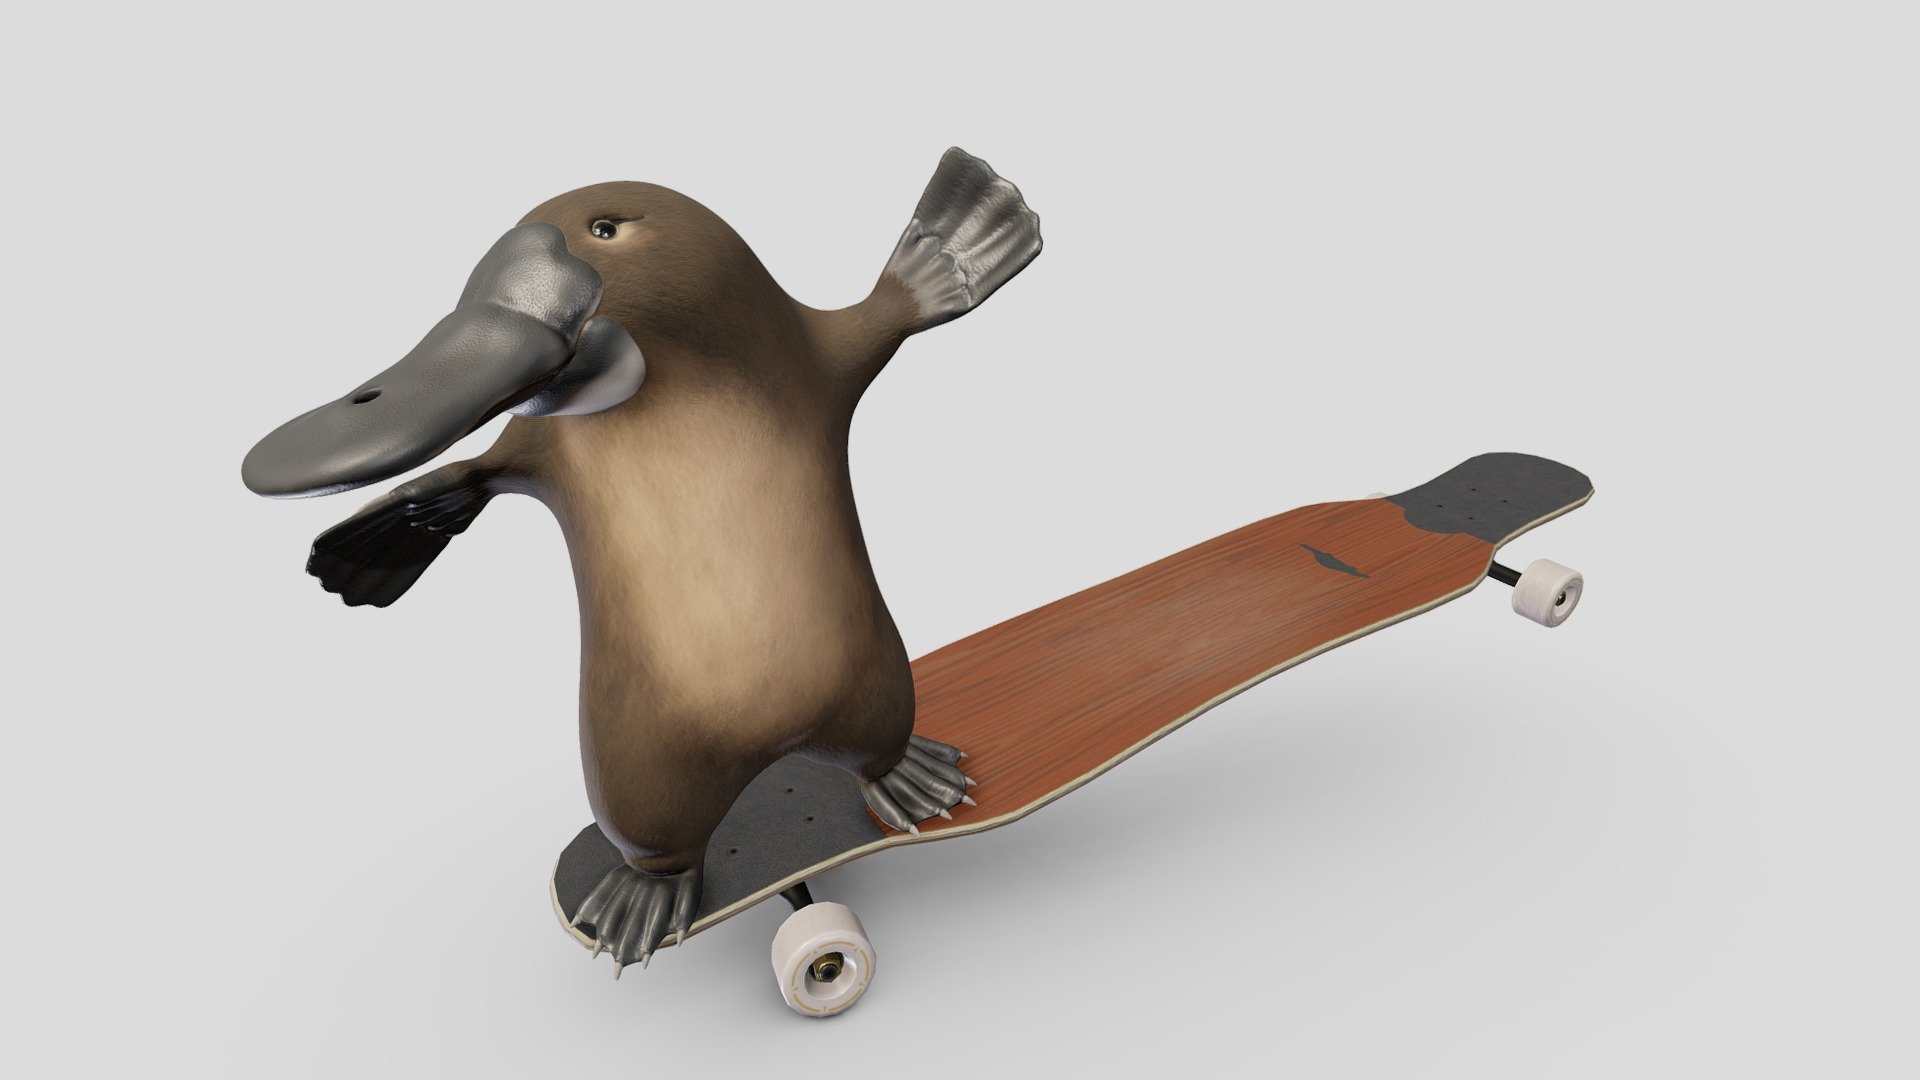 Personal project I did for fun. I longboard in my freetime and my favourite board is the platypus by simple Longboards. Had the idea to literally put a platypus on a platypus! As always would've like to spend more time on it but have to move on to other projects 3d model